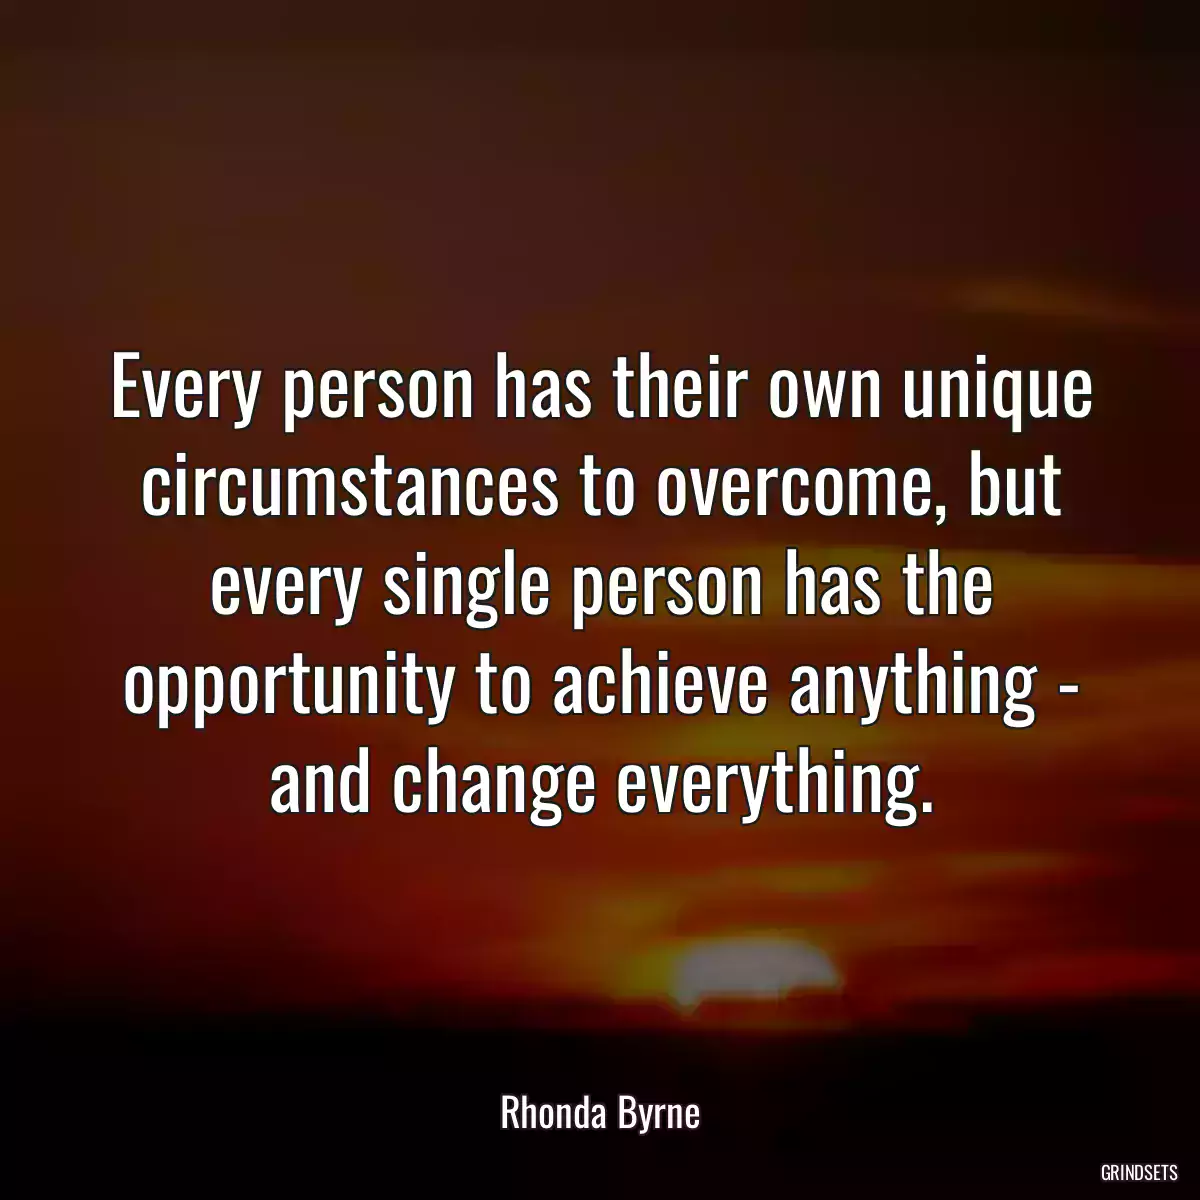 Every person has their own unique circumstances to overcome, but every single person has the opportunity to achieve anything - and change everything.